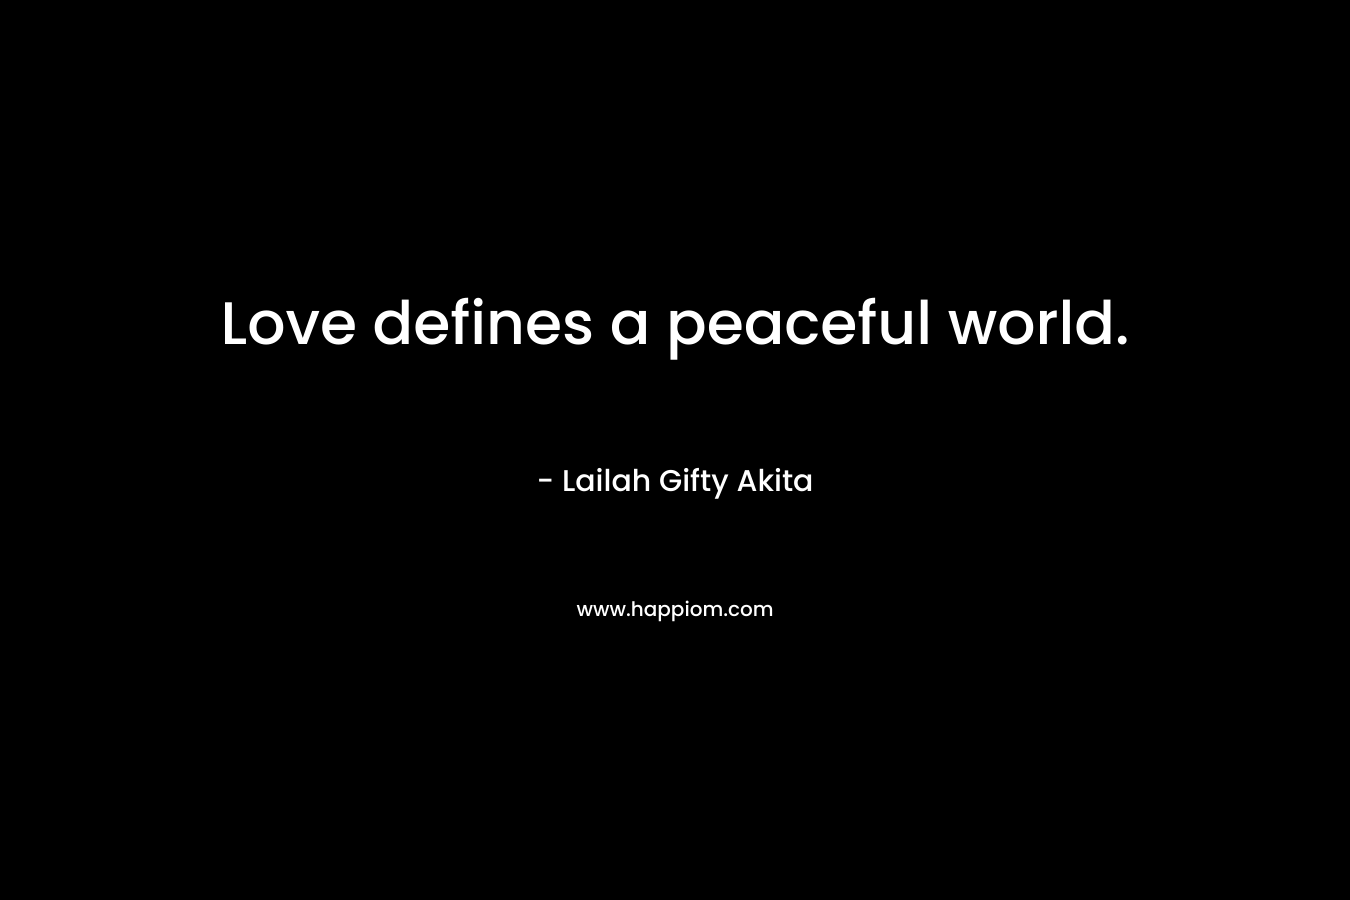 Love defines a peaceful world.